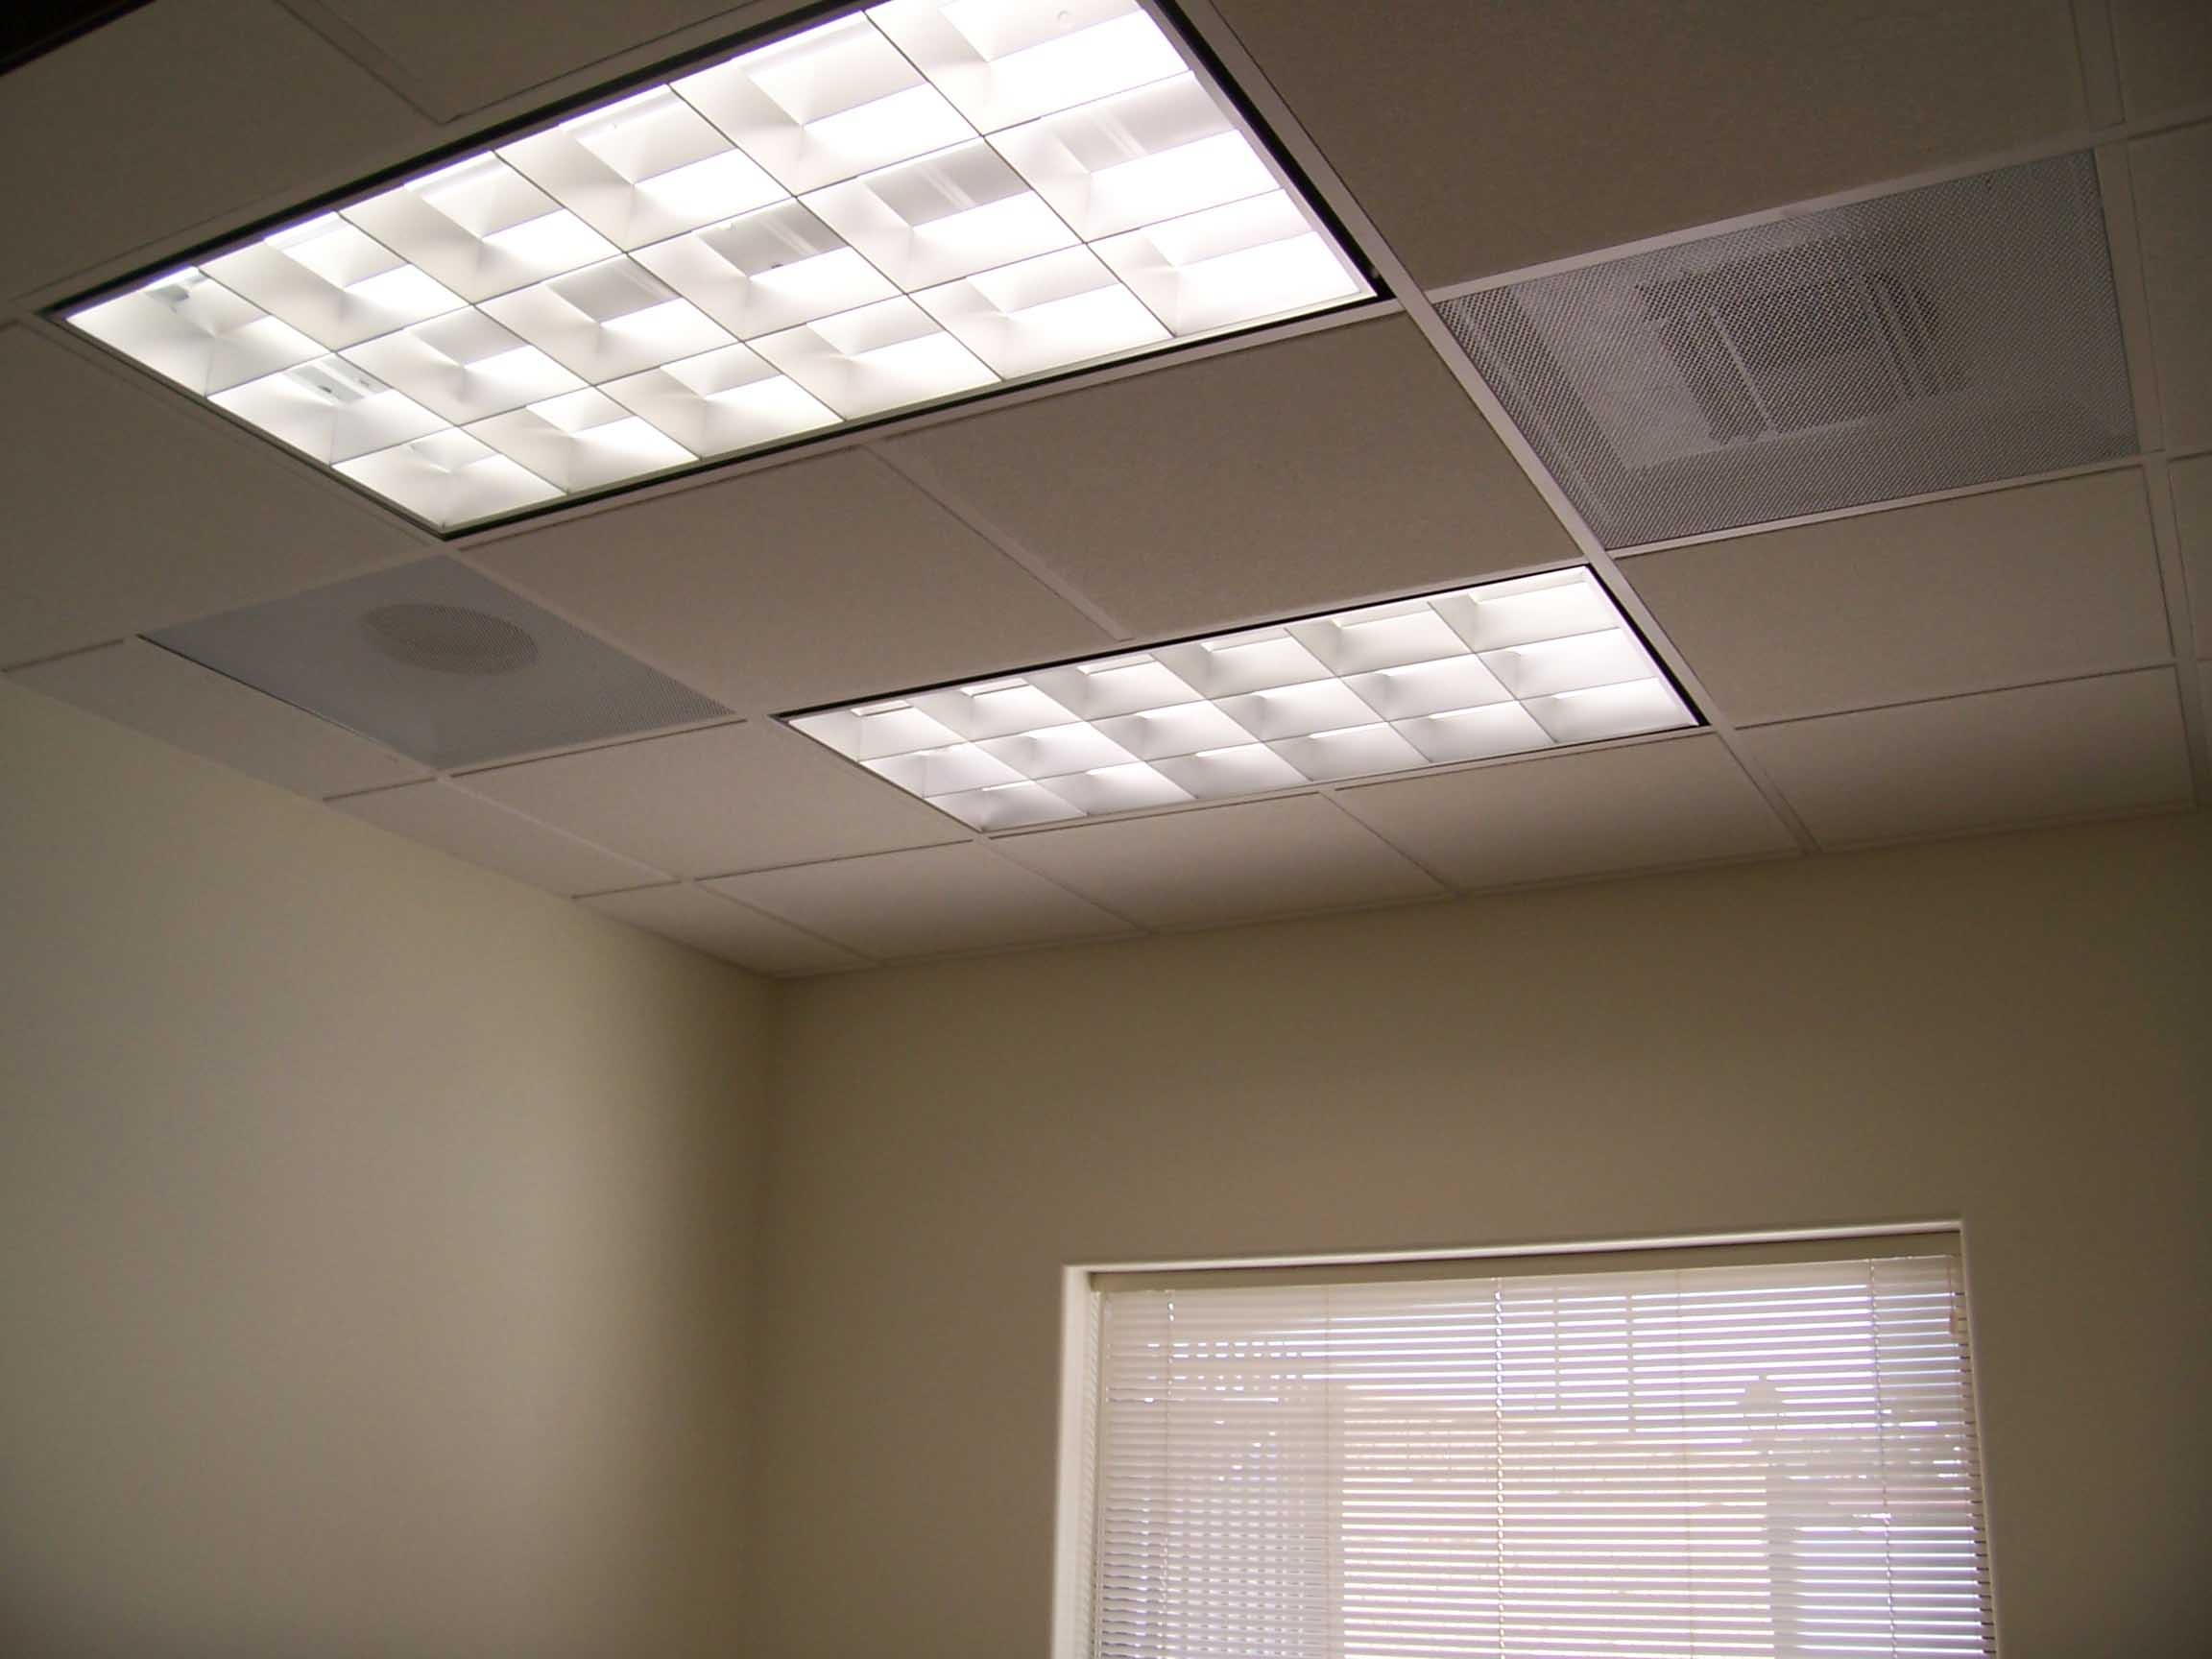 Suspended Ceiling Fluorescent Light Covers